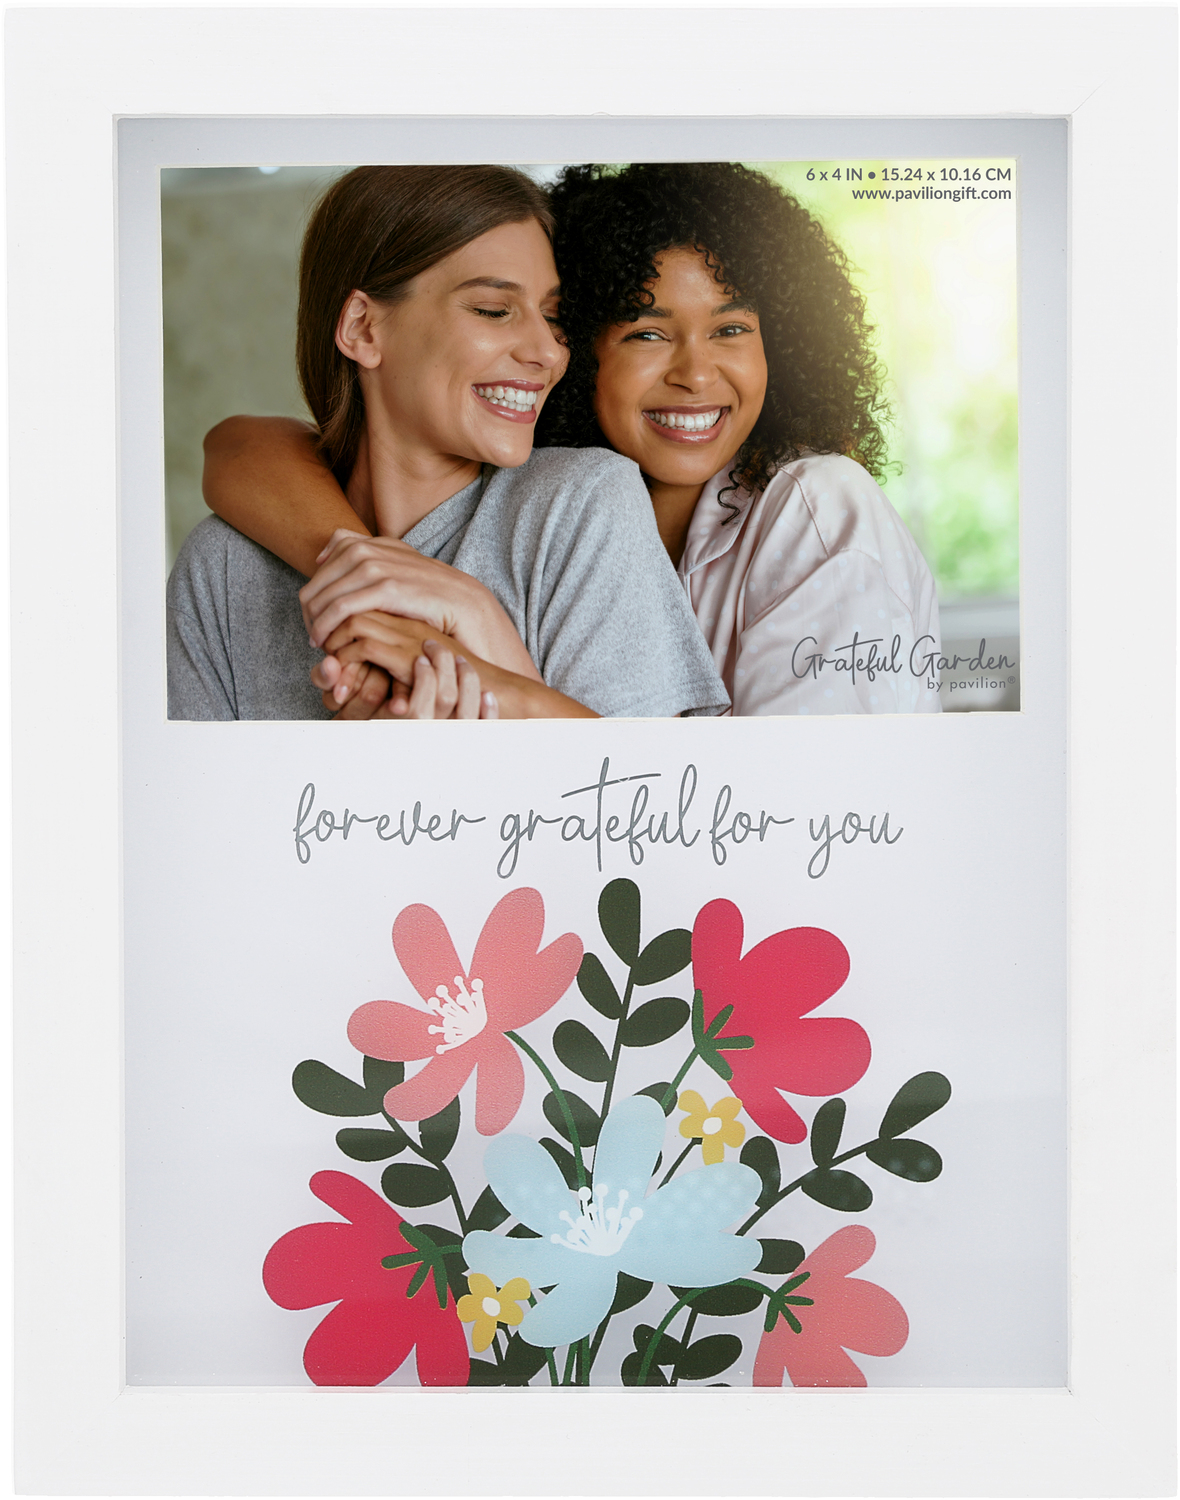 Grateful For You  by Grateful Garden - Grateful For You  - 7.5" x 9.5" Shadow Box Frame
(Holds 6" x 4" Photo)